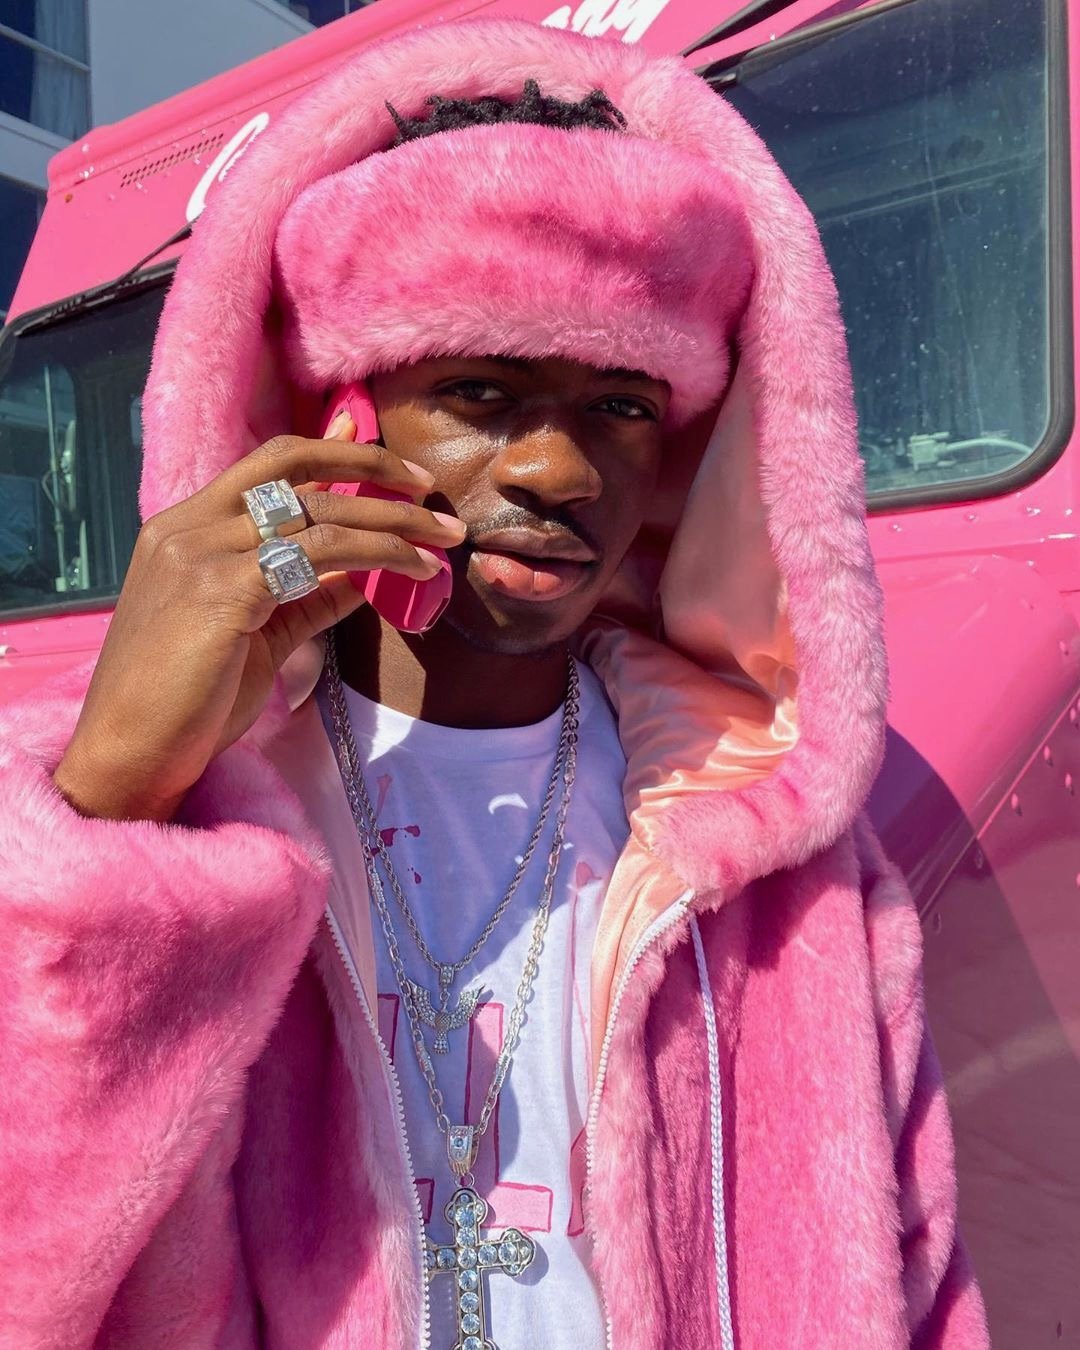 Manny on Twitter: "@RapUp @LilNasX @Mr_Camron That’s the com